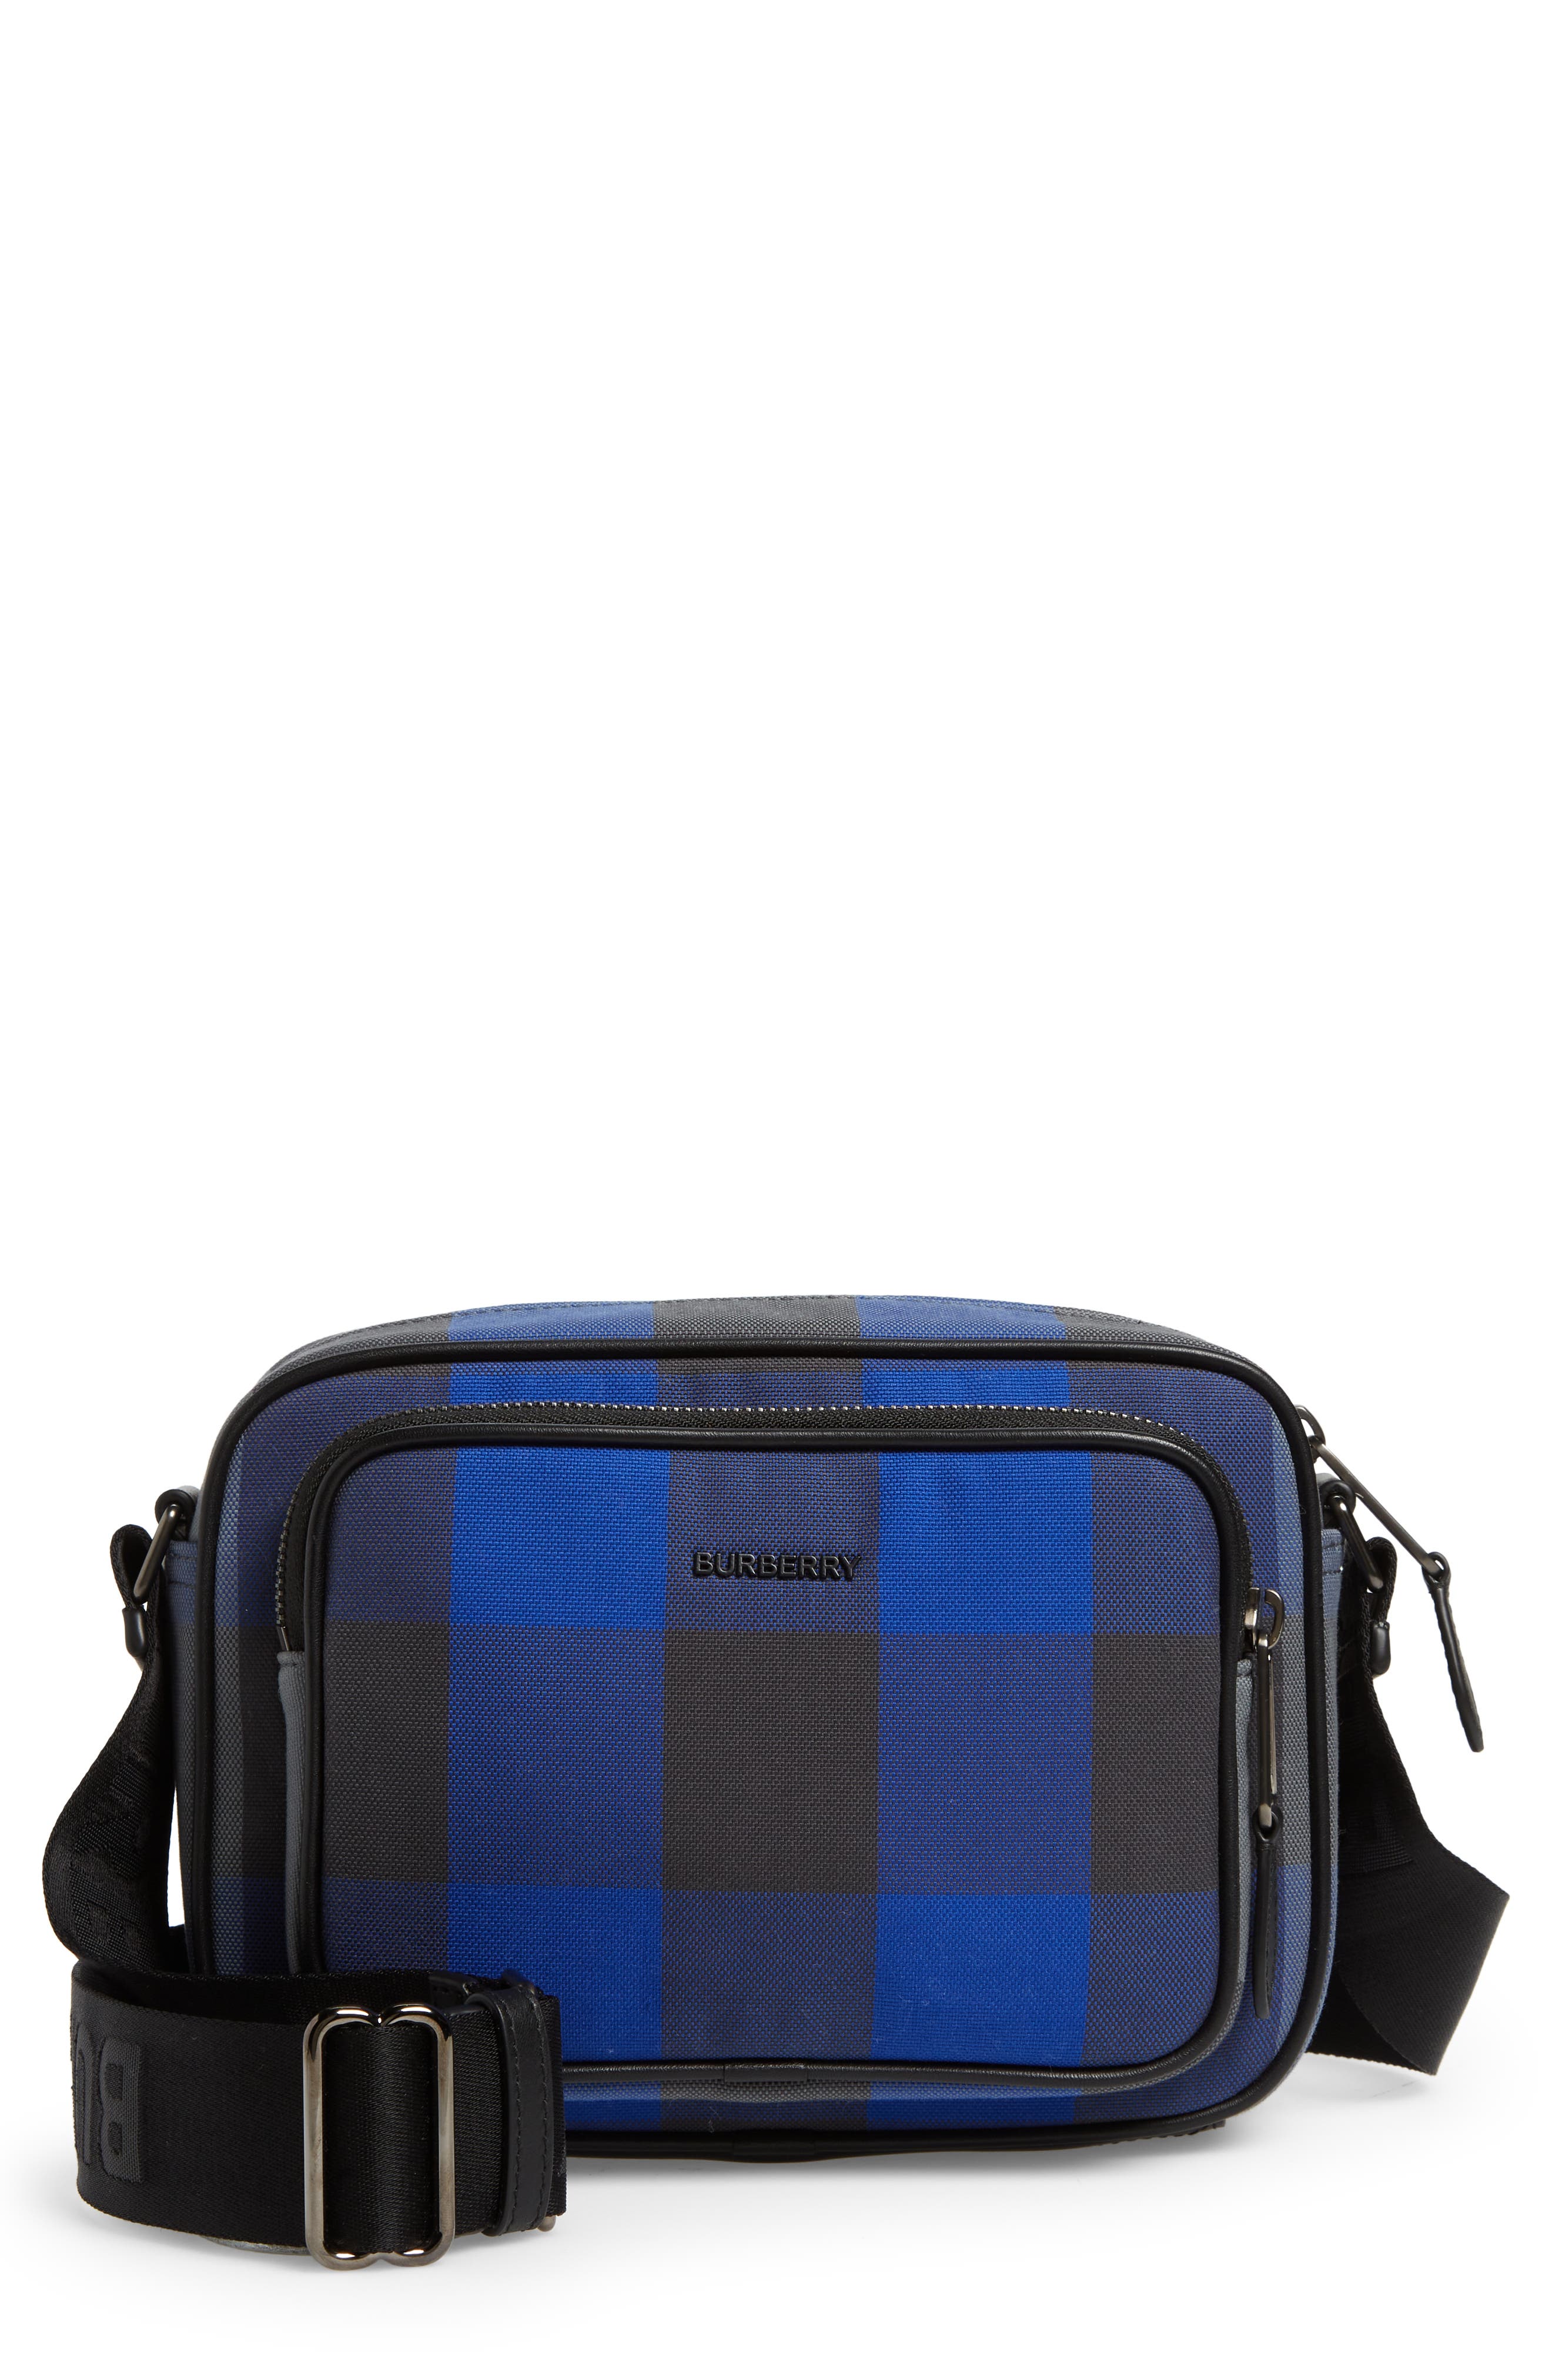 Burberry Paddy Check Canvas Crossbody Bag in Oceanic Blue at Nordstrom